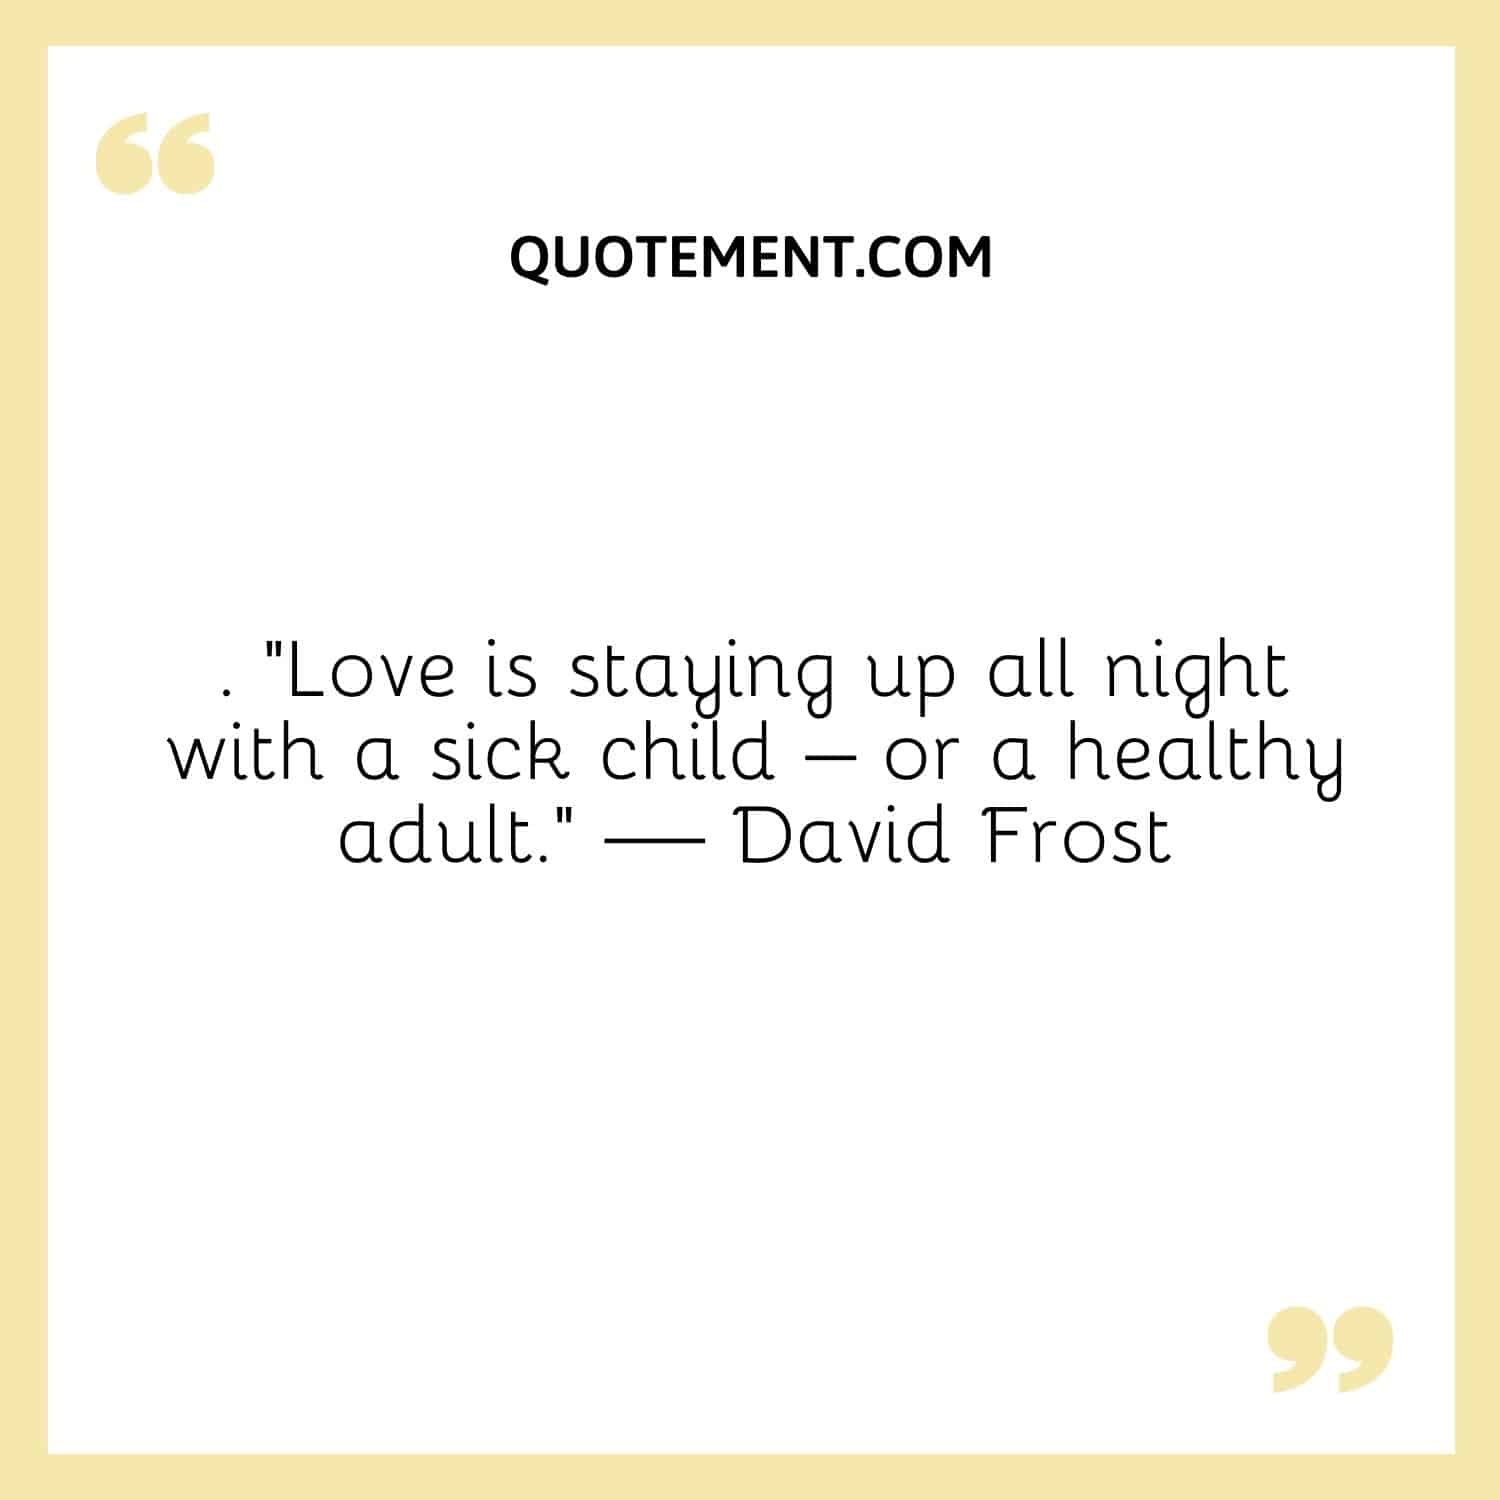 “Love is staying up all night with a sick child – or a healthy adult.” — David Frost